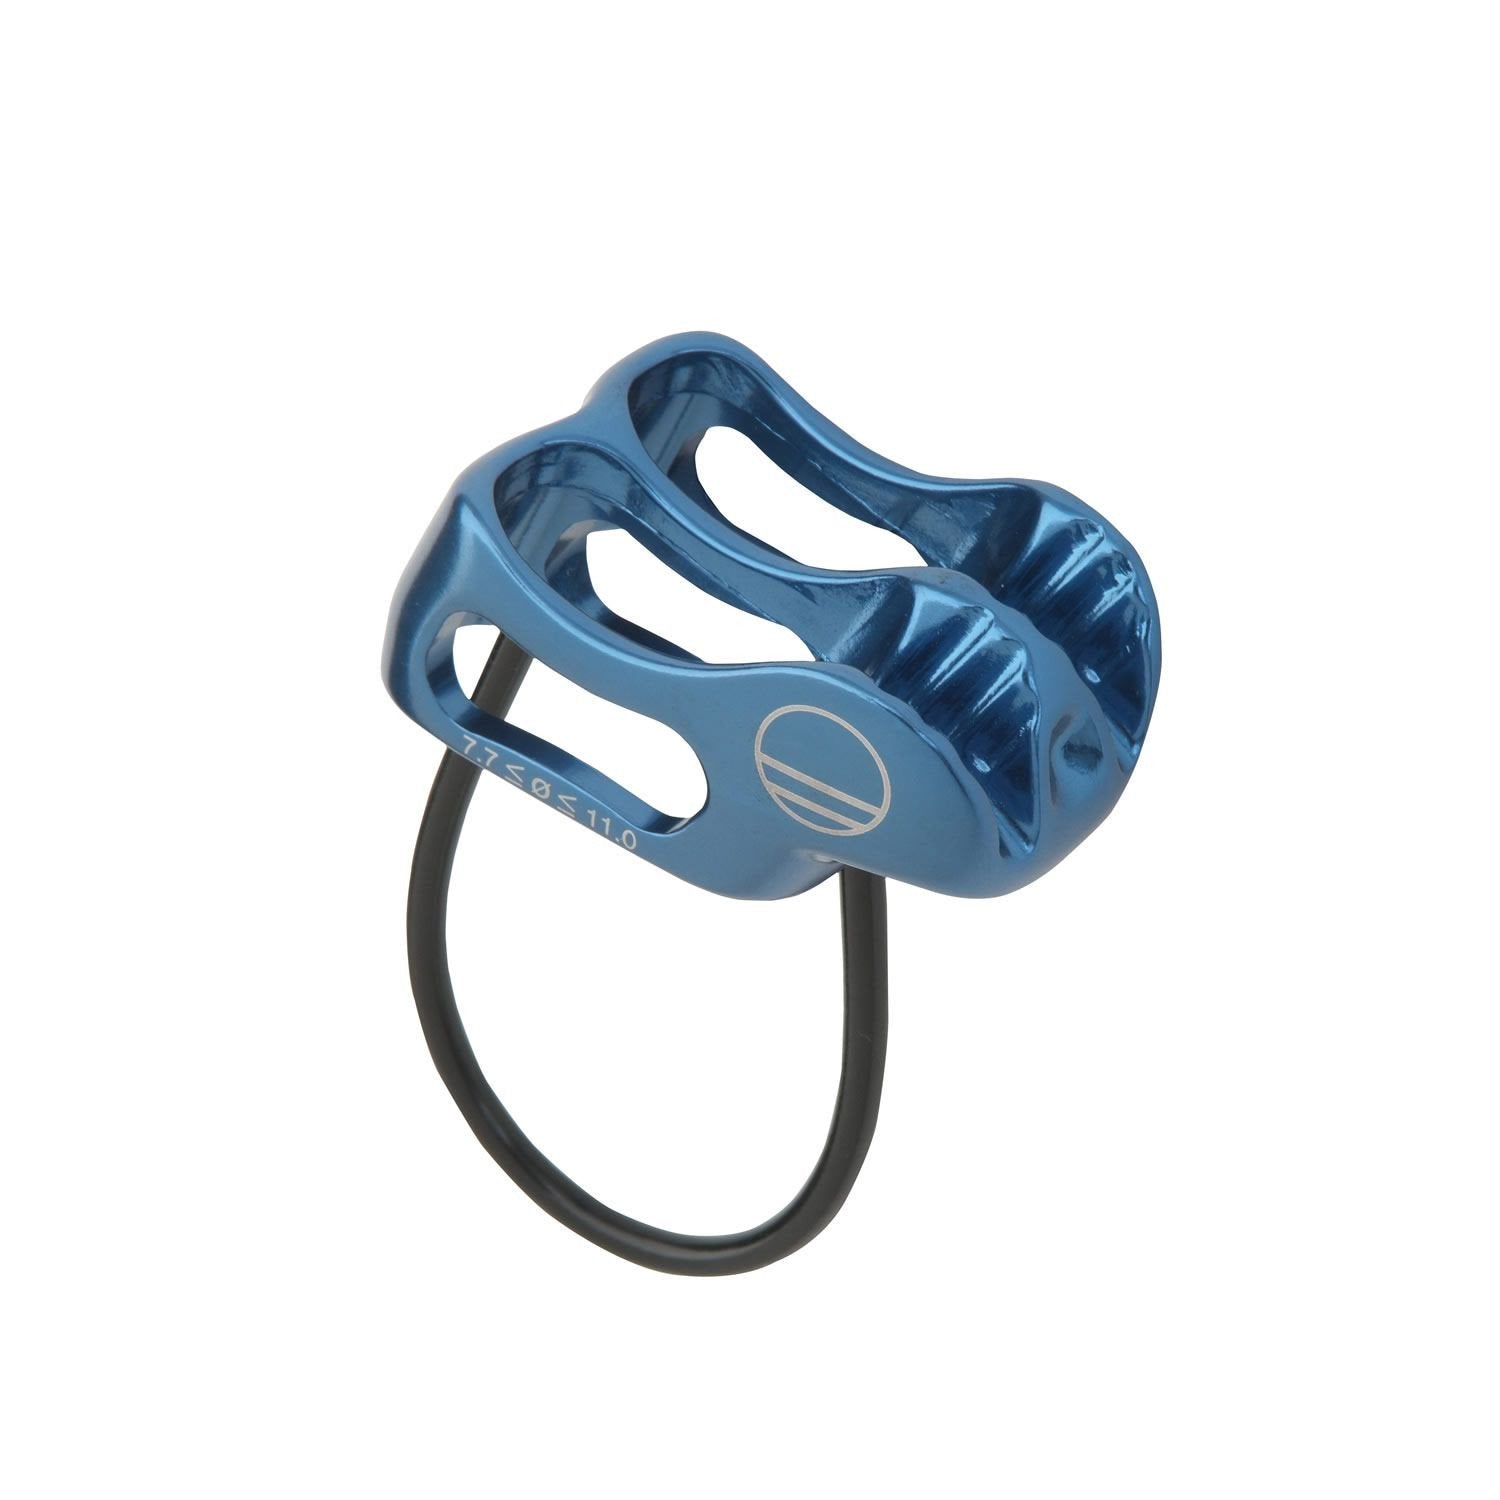 Wild Country Pro Lite belay device, front/side view showing in blue colour